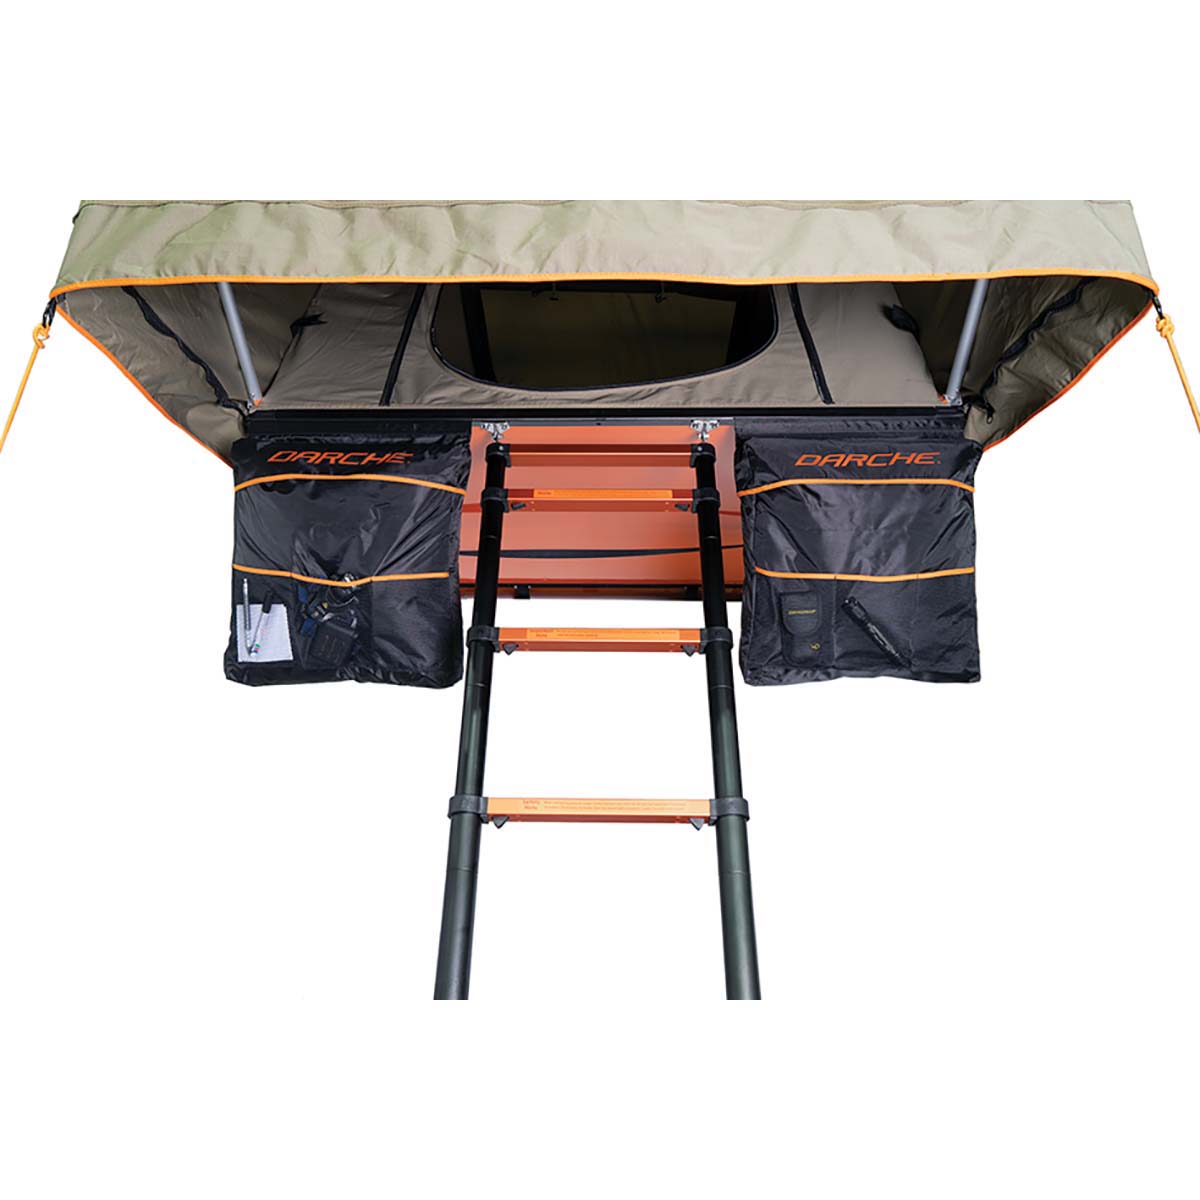 Darche Roof Top Tent Storage Bags 2 Pack